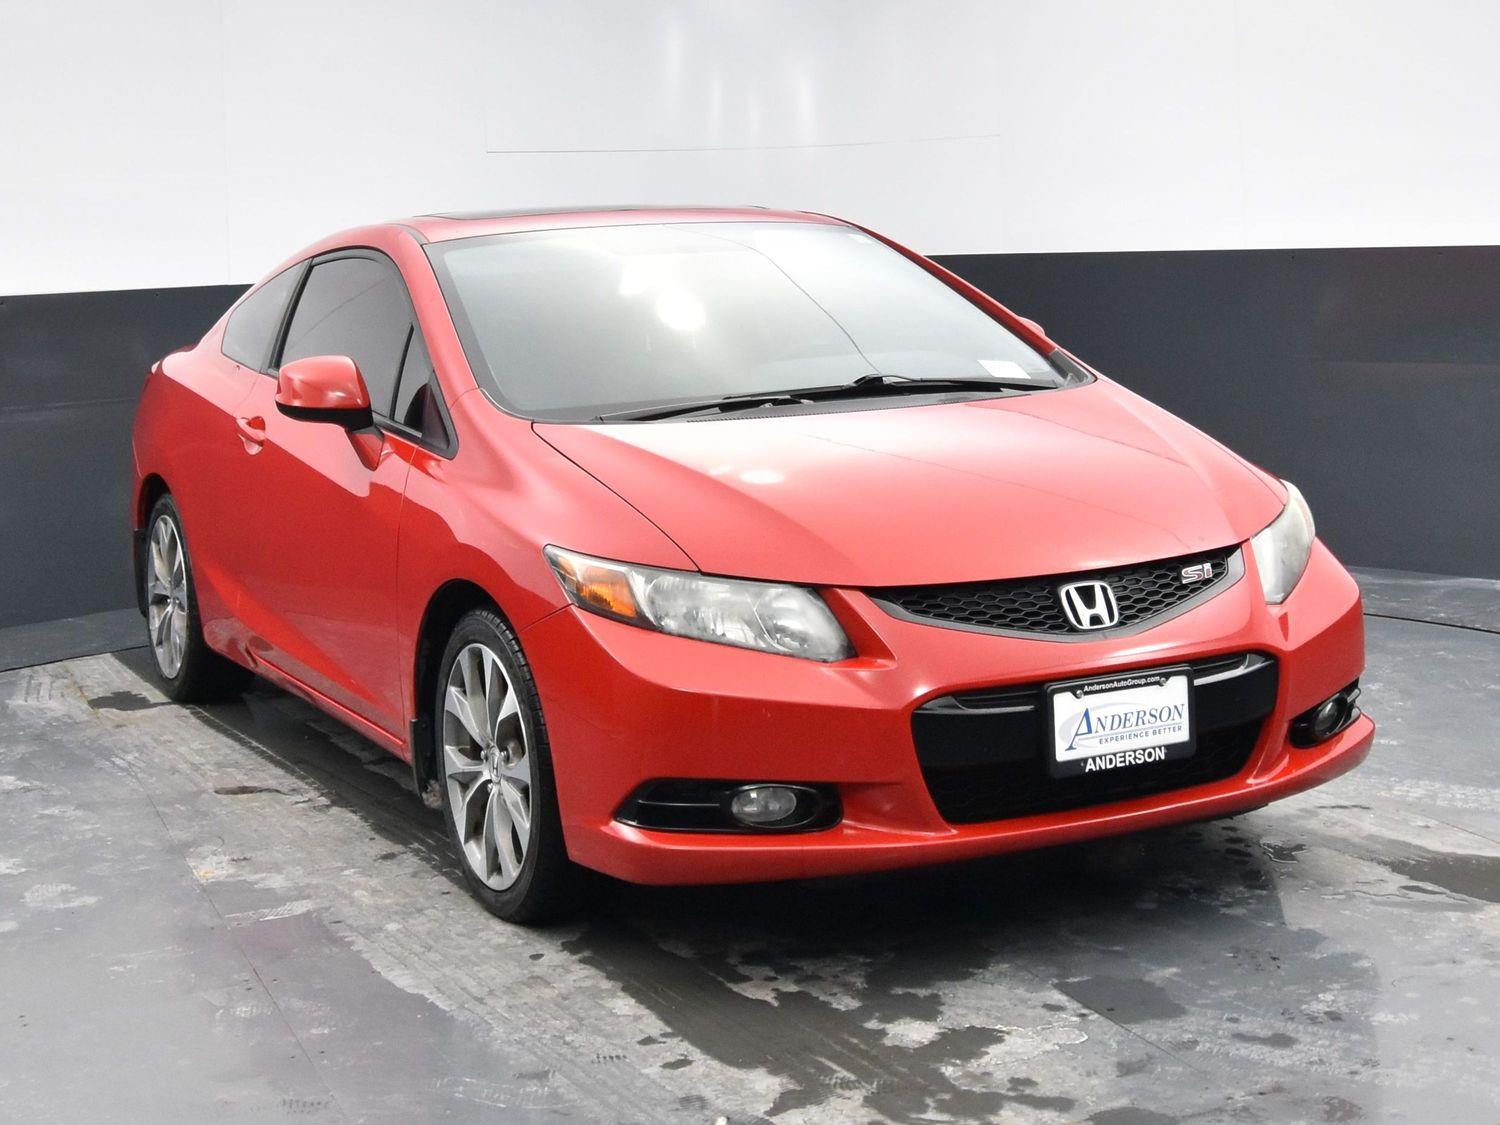 Used 2012 Honda Civic Cpe Si 2 Door Coupe for sale in Grand Island NE